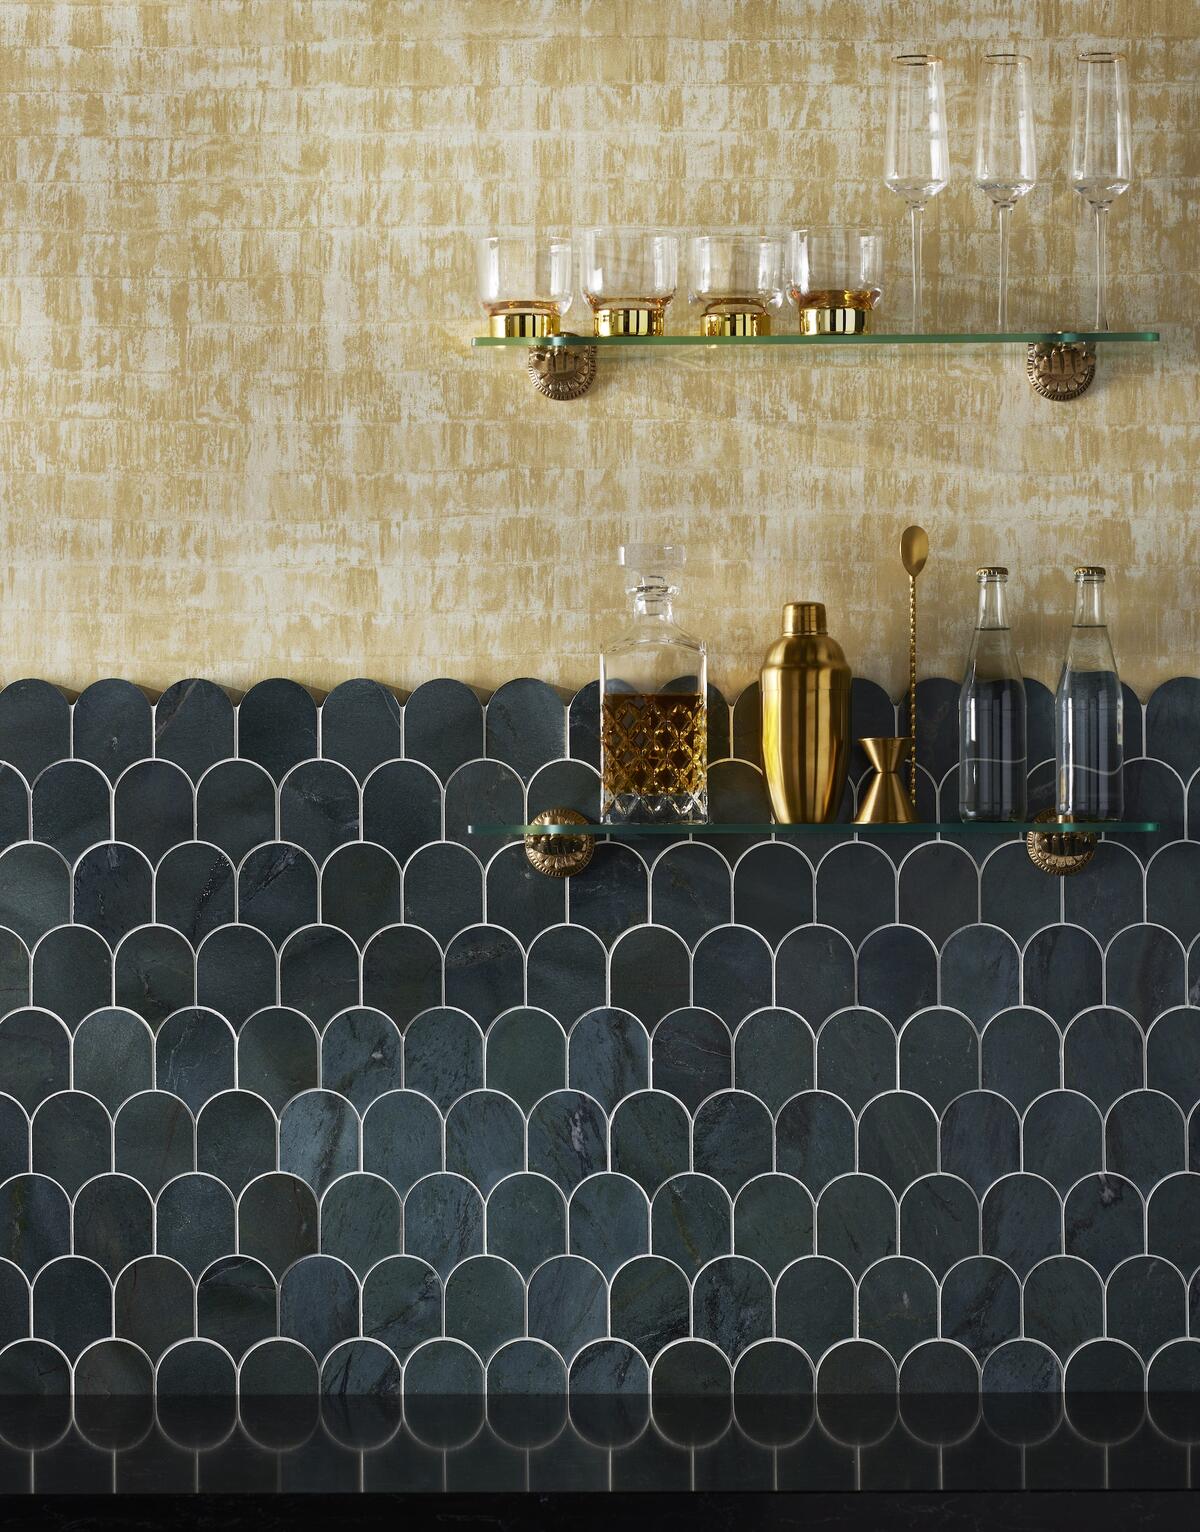 Contemporary Chicago and classical Greece inspired HGTV star Alison Victoria’s debut Tile Shop collection